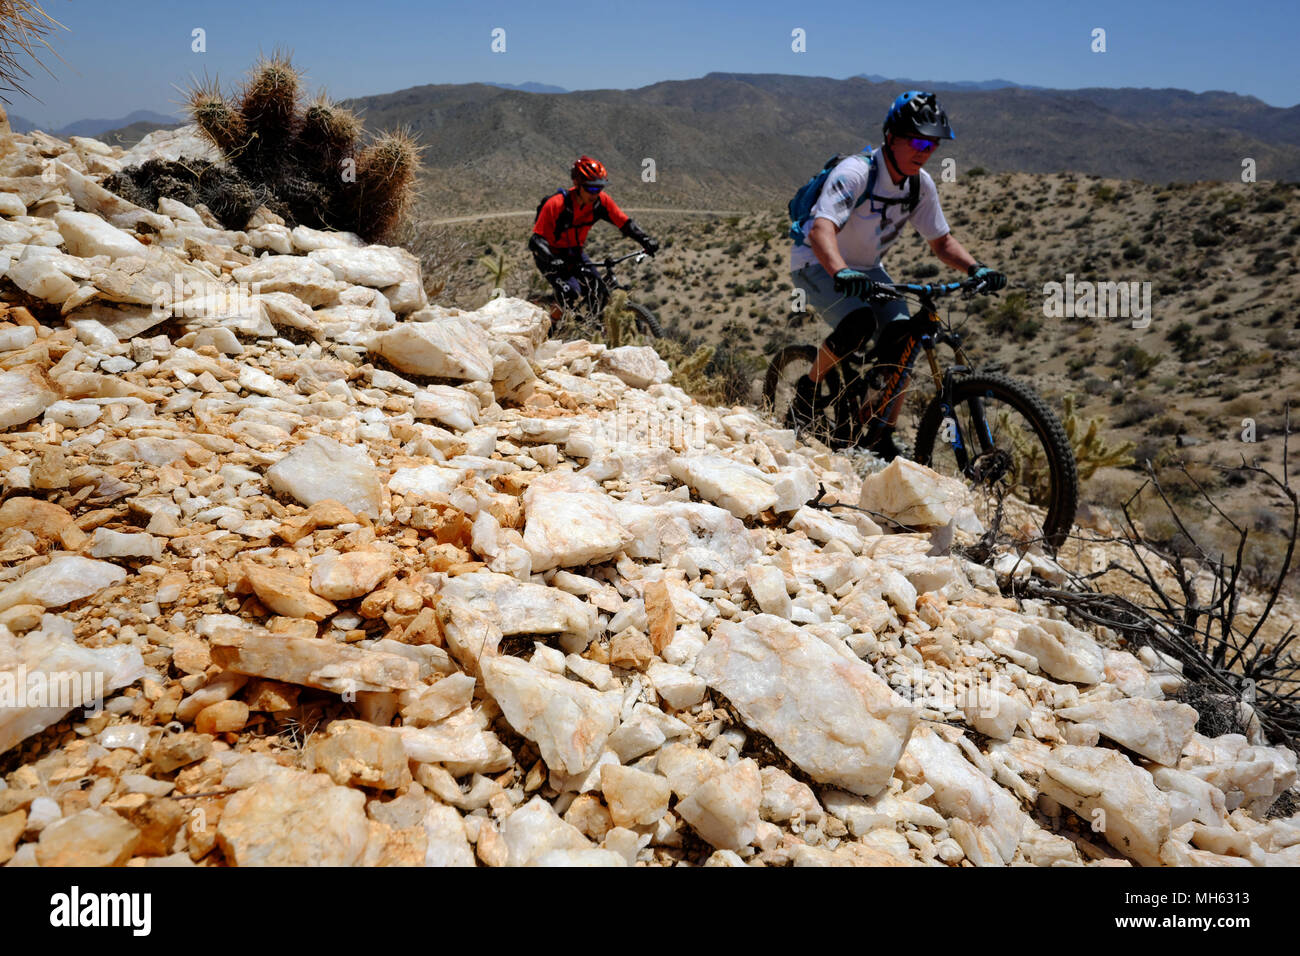 Palm Springs, California, USA. 28th Apr, 2018. Mountain bikers pass cactus and white quartz rocks on the trail. This is a true Southern California Epic mountain bike ride in the Santa Rosa and San Jacinto Mountains National Monument. Offering huge vistas, off-camber narrow single track, ridges, stream beds, rocks, sand, cactus. This point-to-point route passes a varied array of high desert trails from the foot of the north slope of Santa Rosa Mountains and Agua Caliente Indian Reservation at 4500 feet down to Palm Springs 29 miles away at 500 feet. (Credit Image: © Ruaridh Stewart via ZUMA Wi Stock Photo